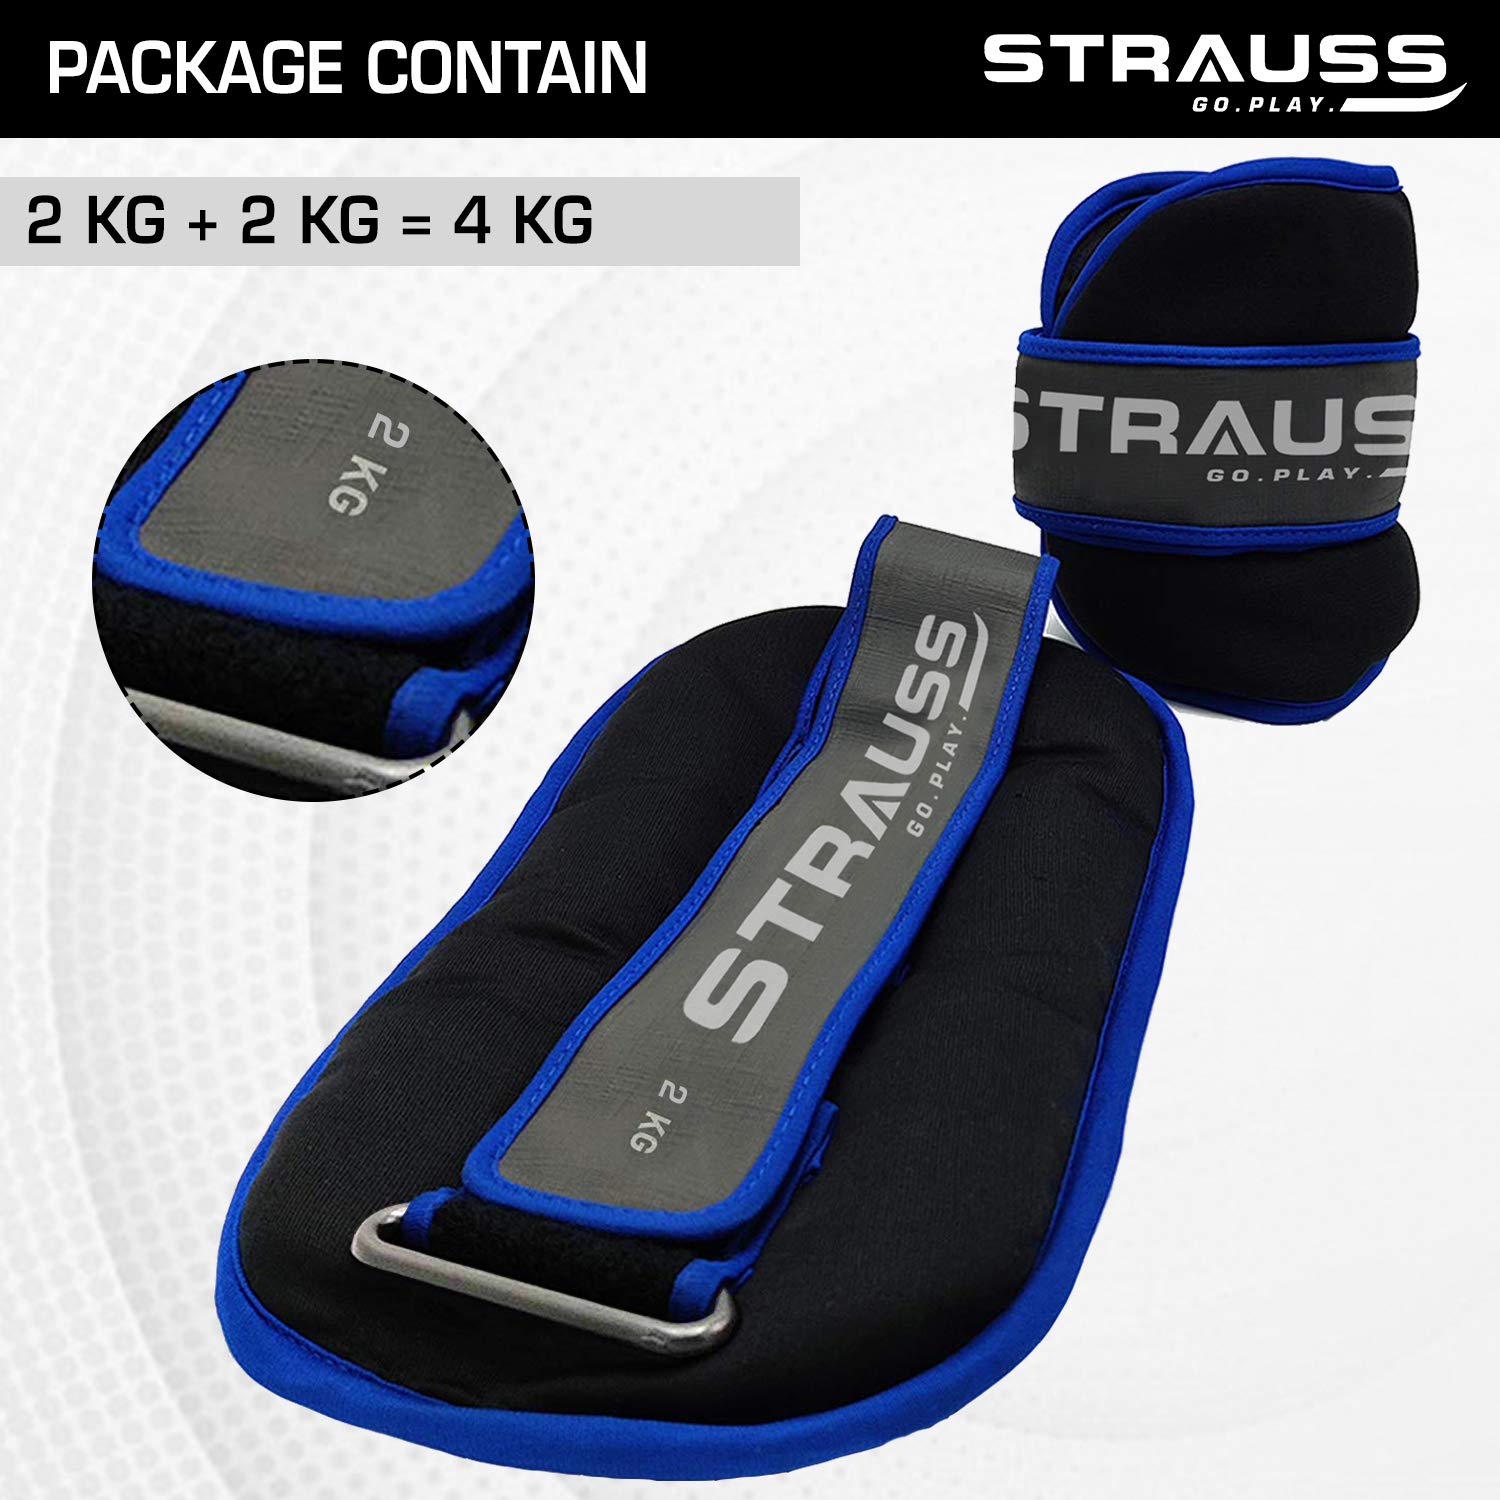 Strauss Round Shape Adjustable Ankle Weight/Wrist Weights 2 KG X 2 | Ideal for Walking, Running, Jogging, Cycling, Gym, Workout & Strength Training | Easy to Use on Ankle, Wrist, Leg, (Blue)